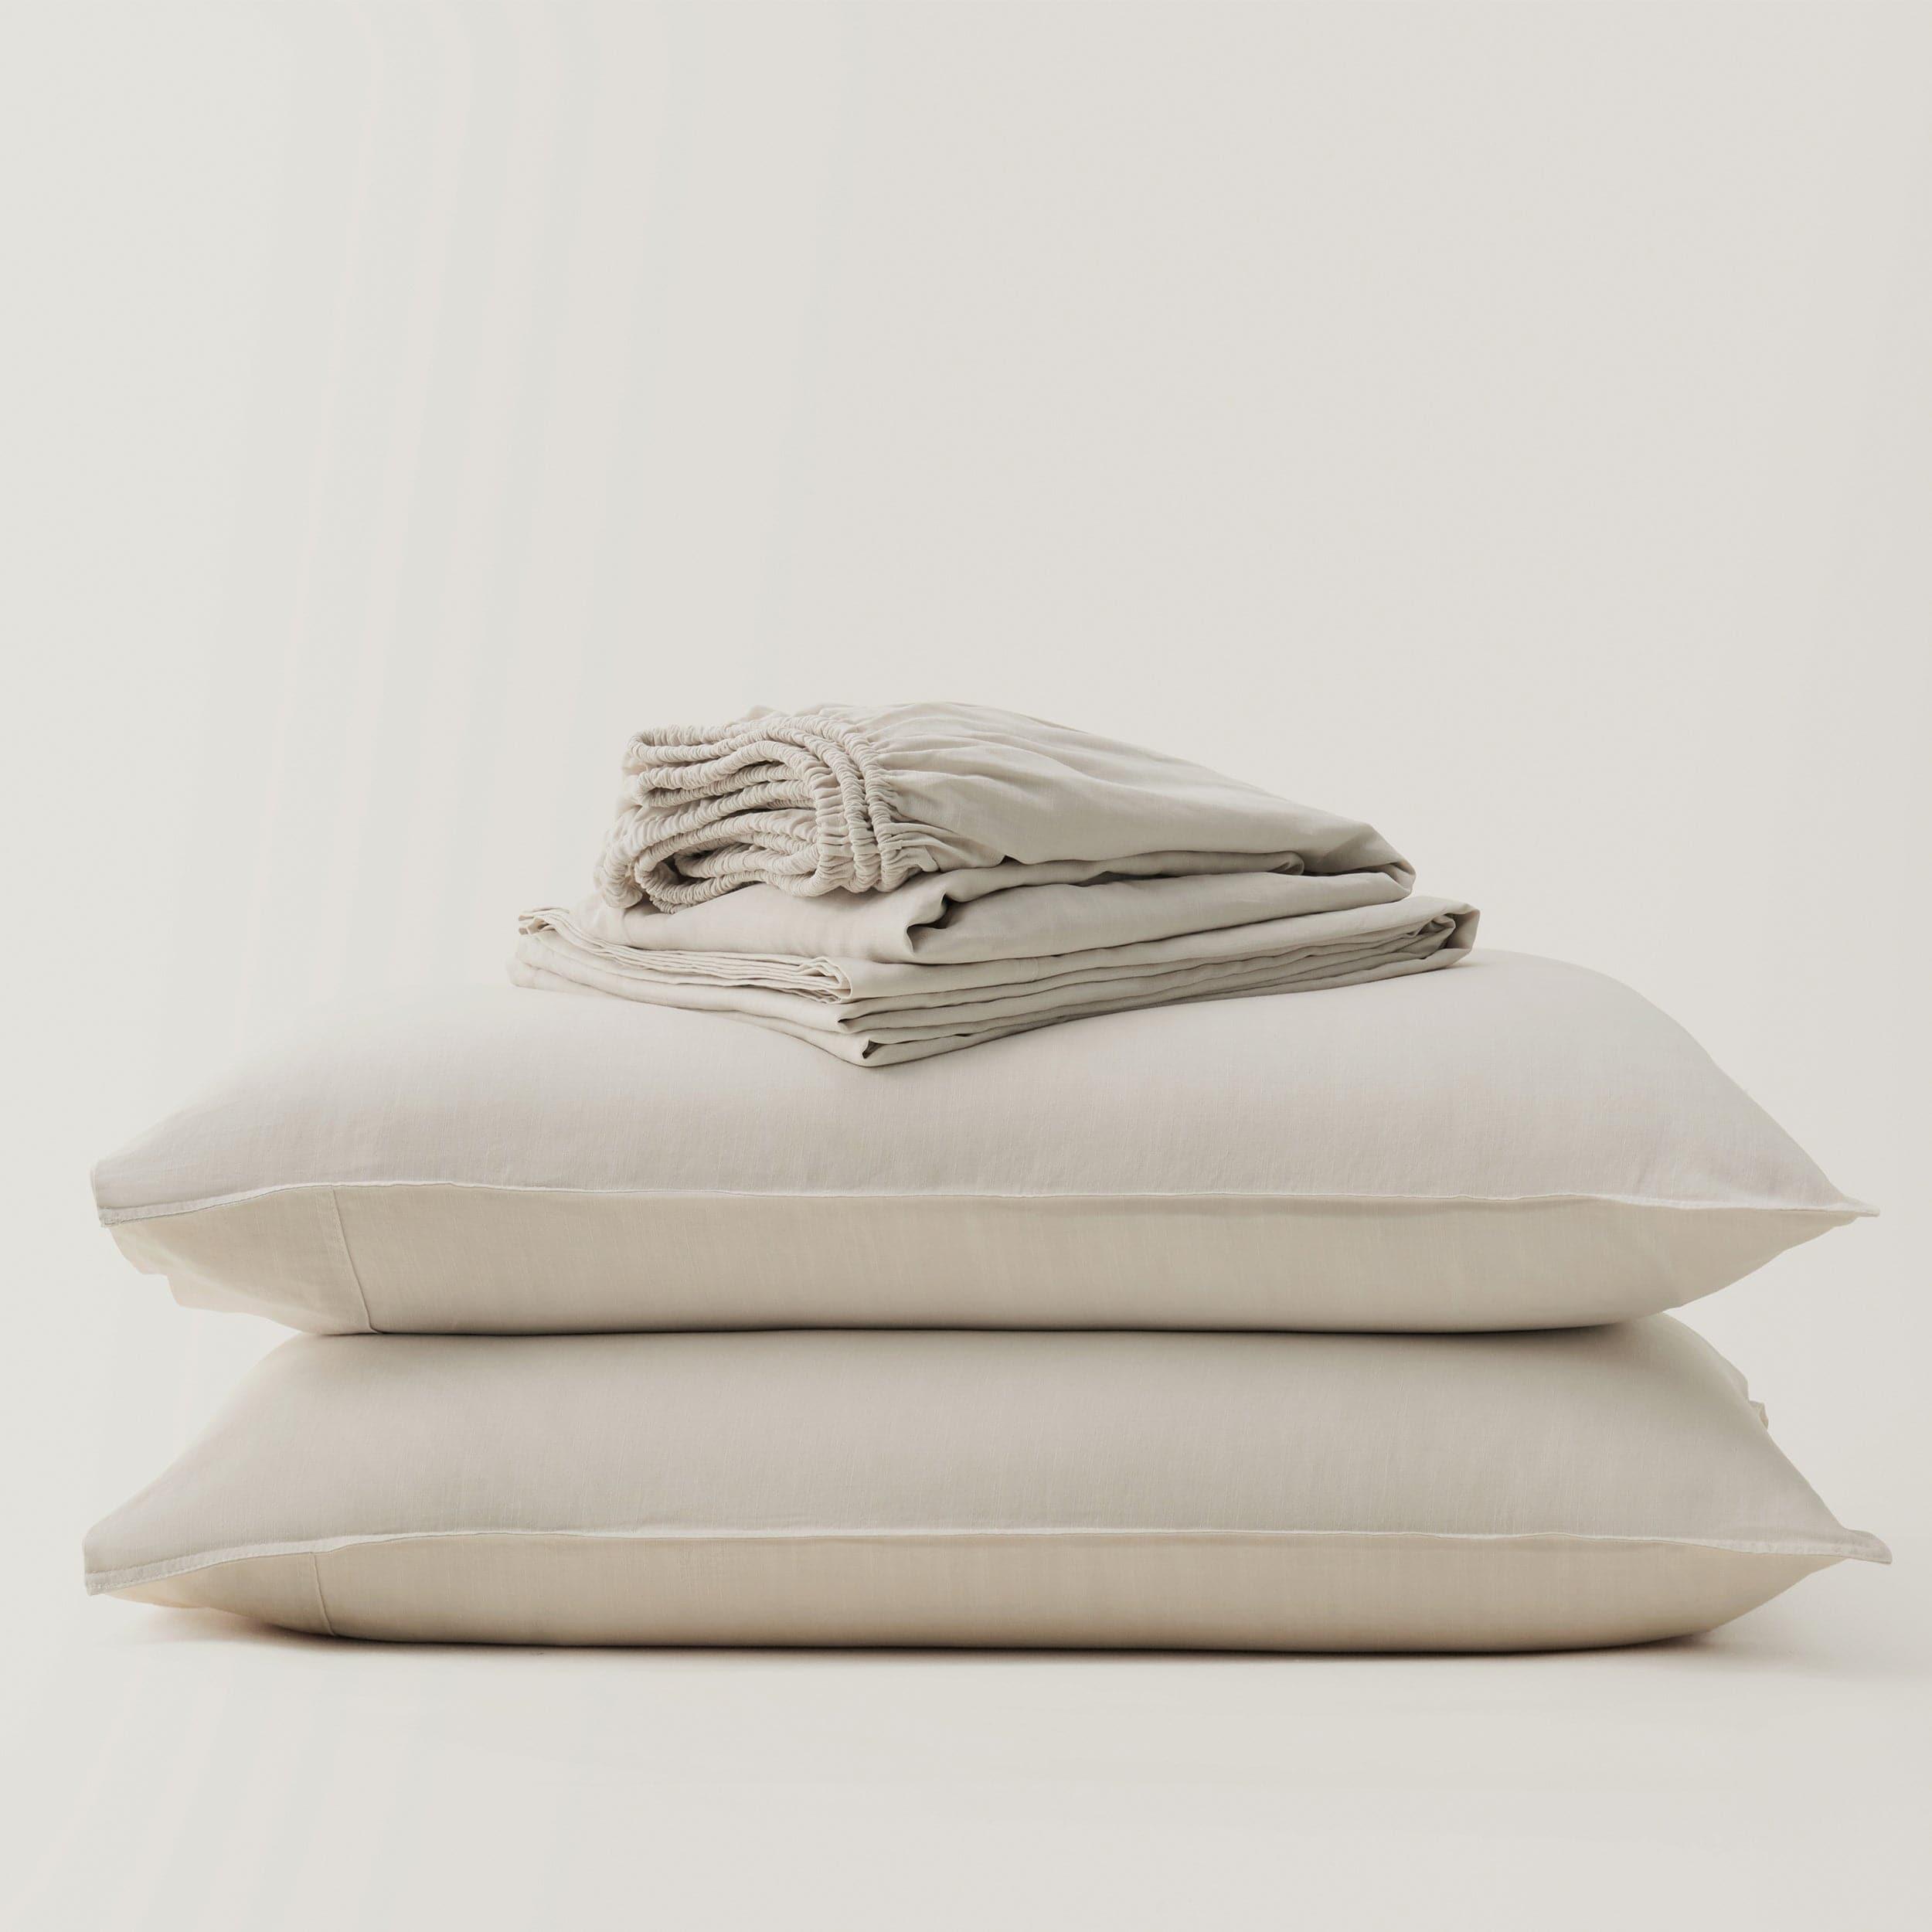 Customize your bed with a stylish queen size sheet set for a personalized touch.